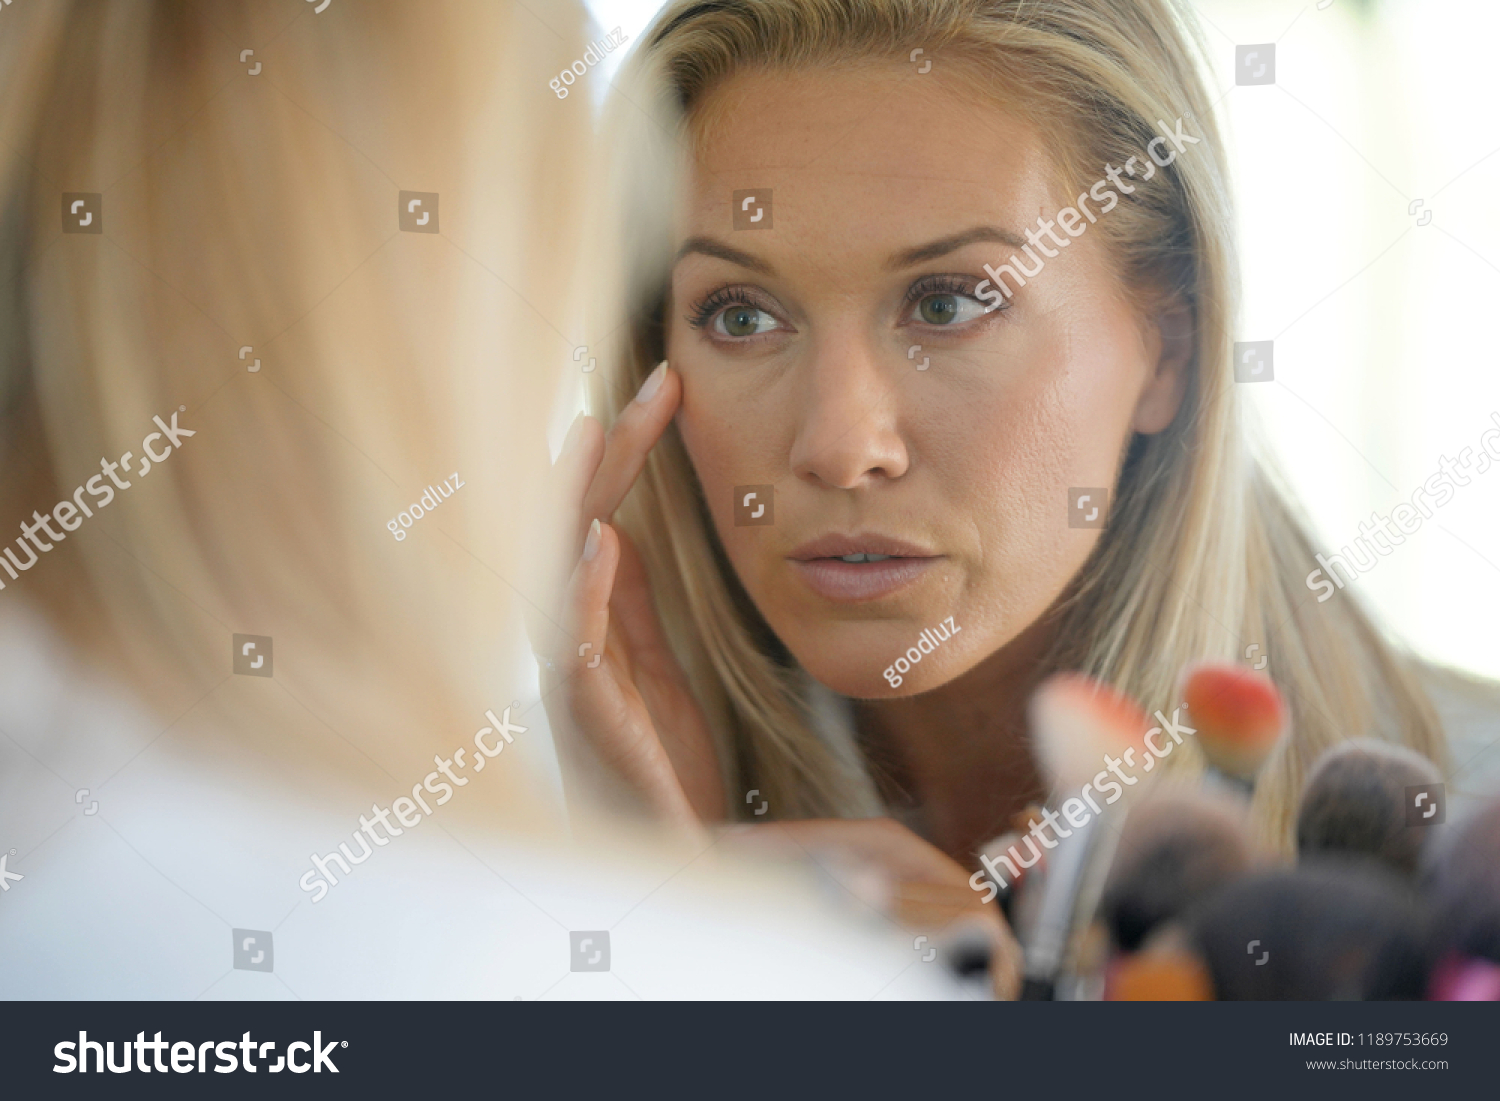 Middle-aged woman looking at her skin in front of mirror #1189753669